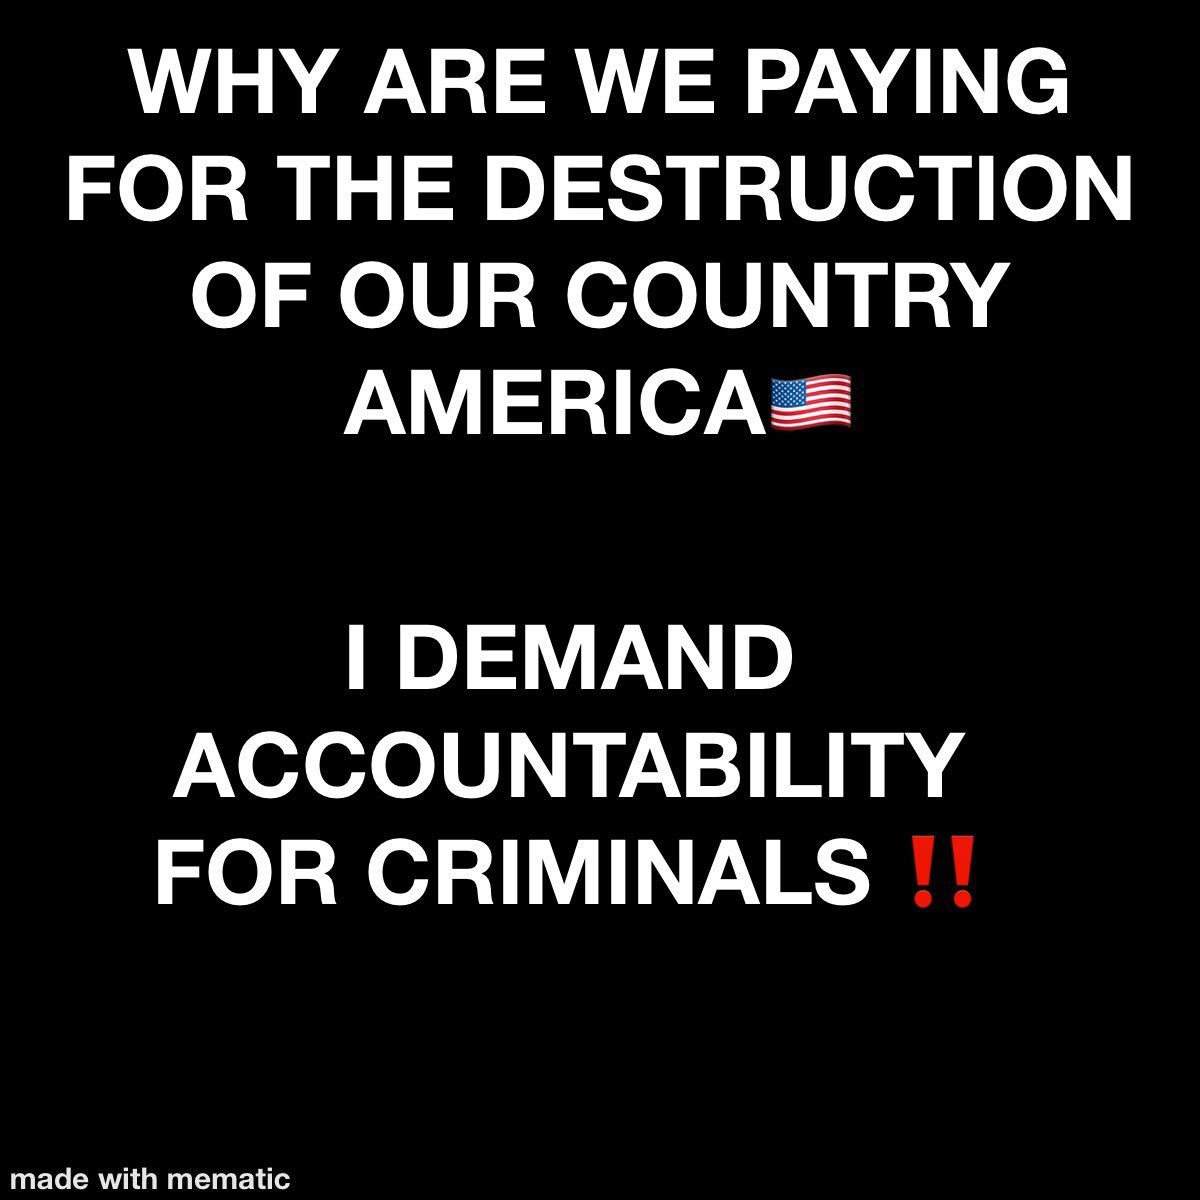 THE CRIMINALS MUST BE STOPPED ‼️🇺🇸